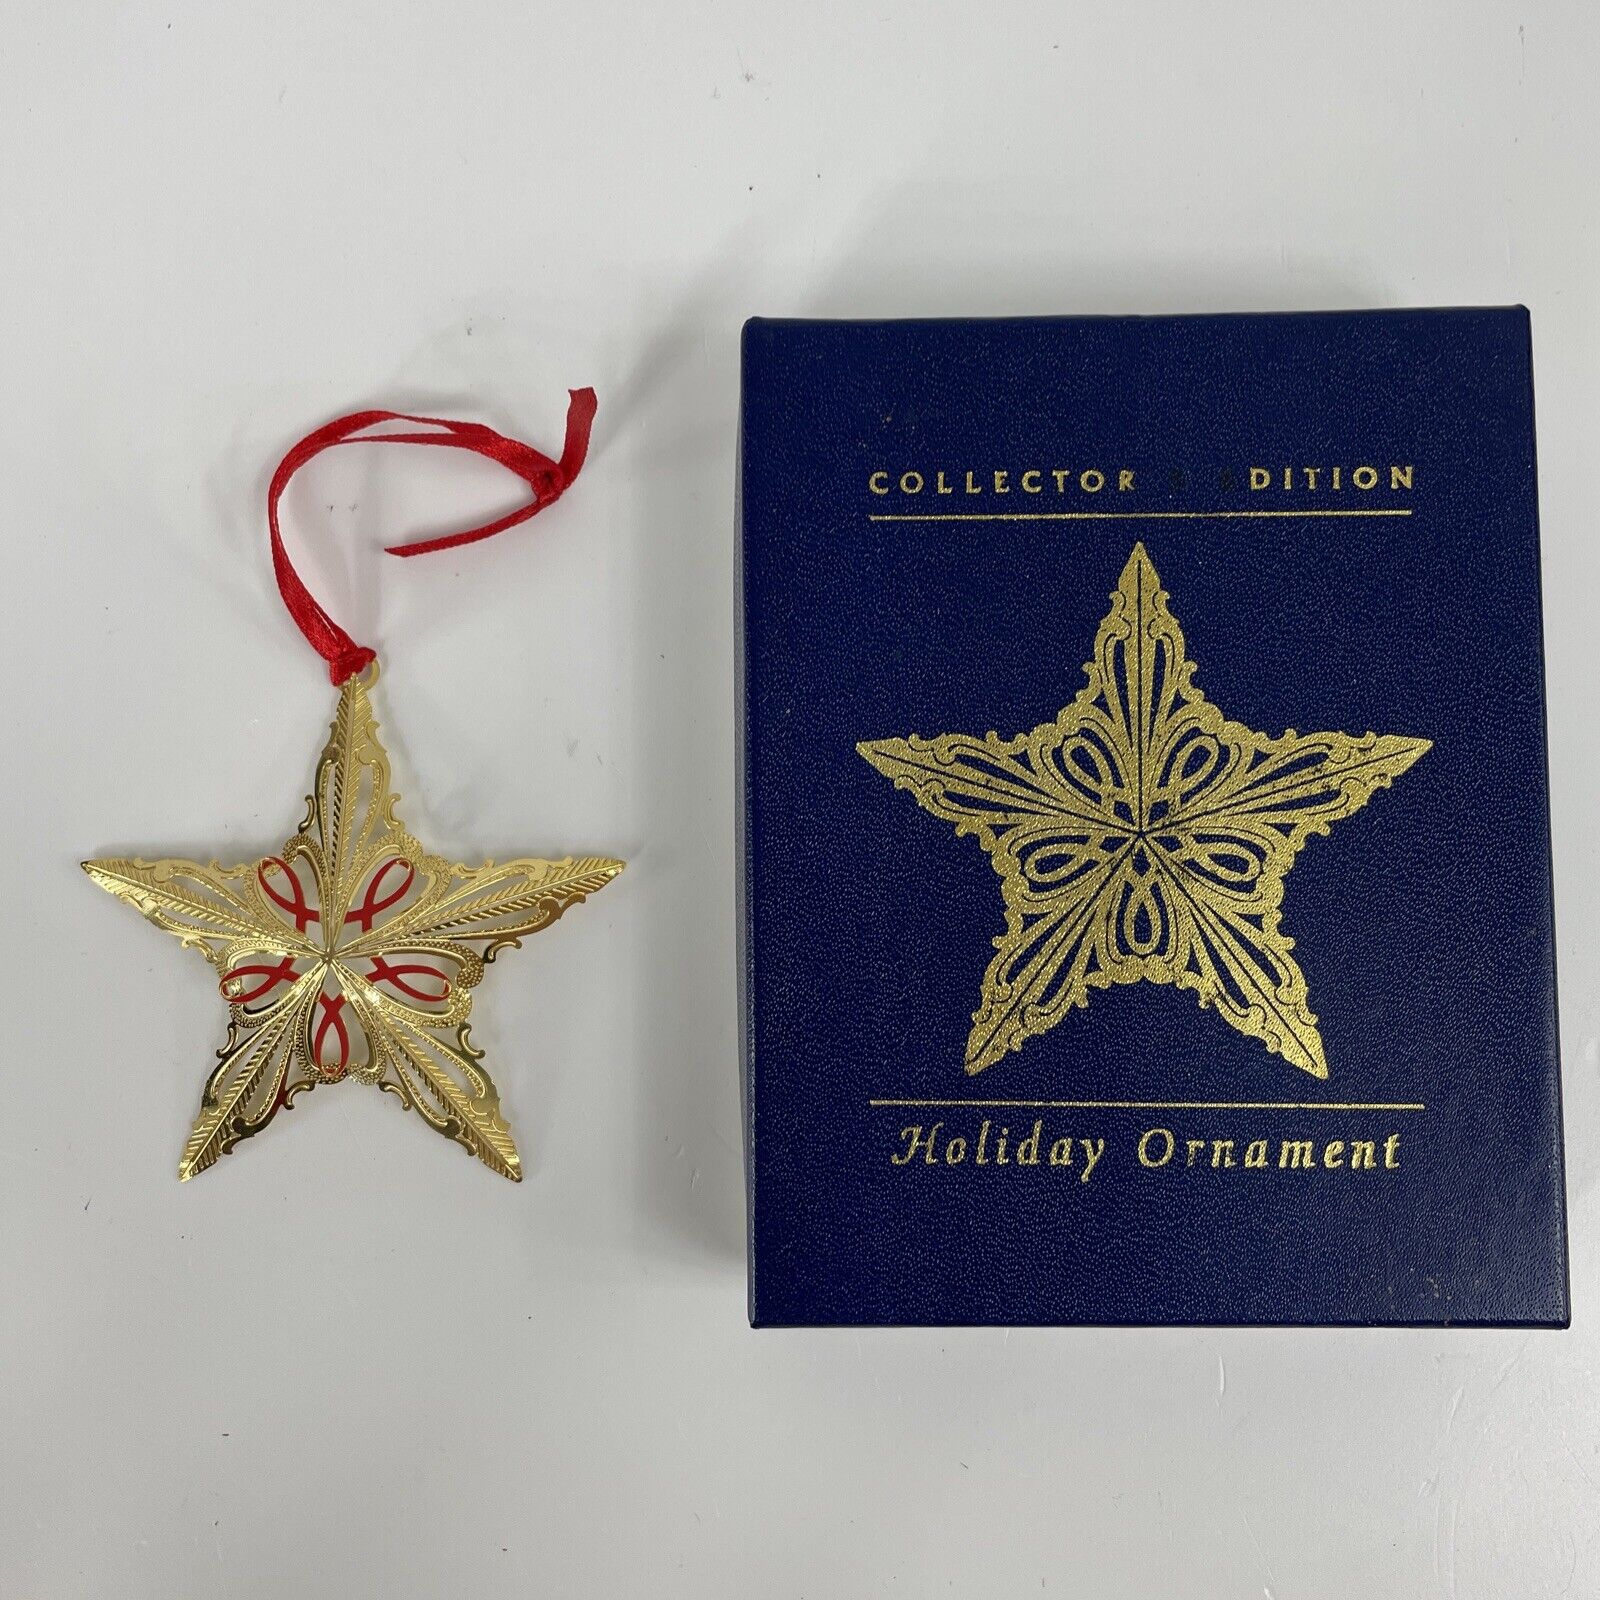 The Millennium Star Of Hope HIV/AIDS Awareness Collectors Edition Ornament